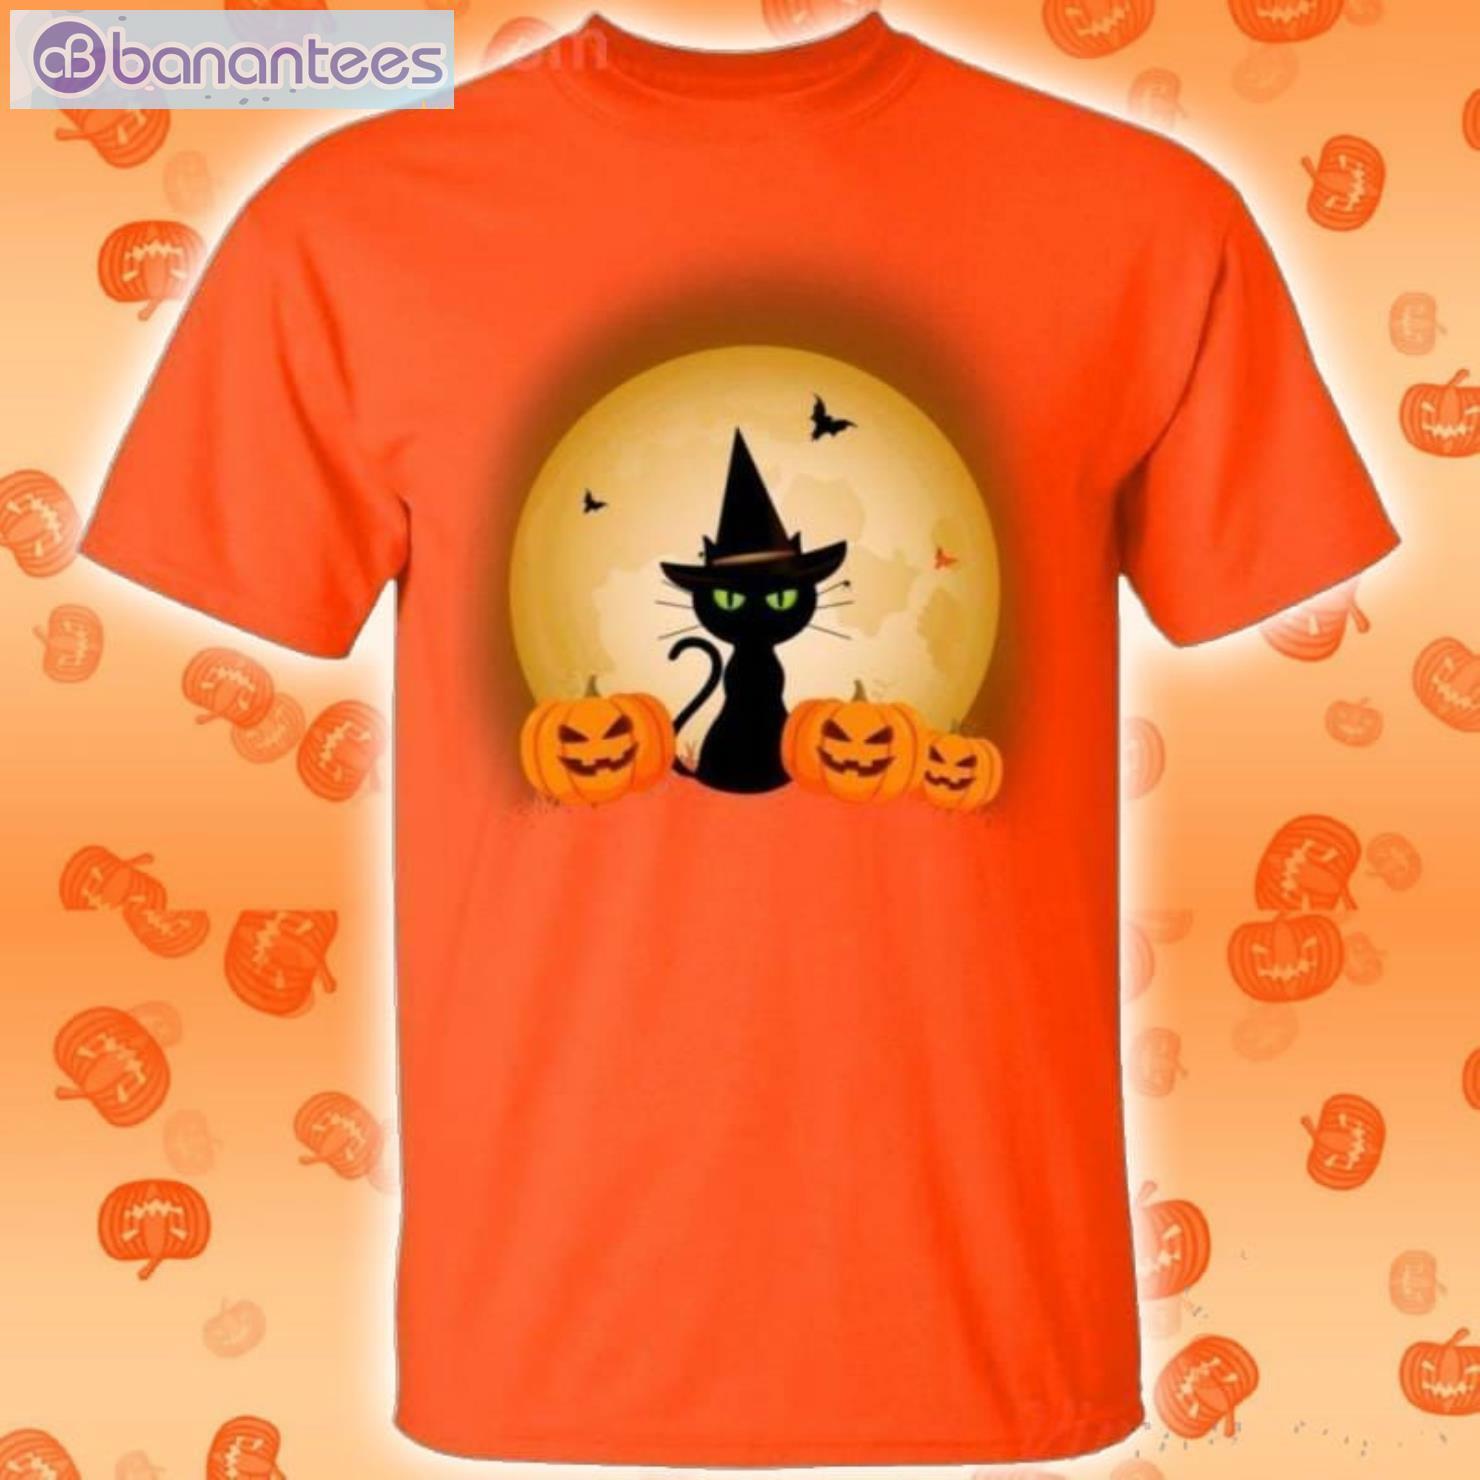 Black Cat Sit By The Moon Halloween T-Shirt Product Photo 2 Product photo 2